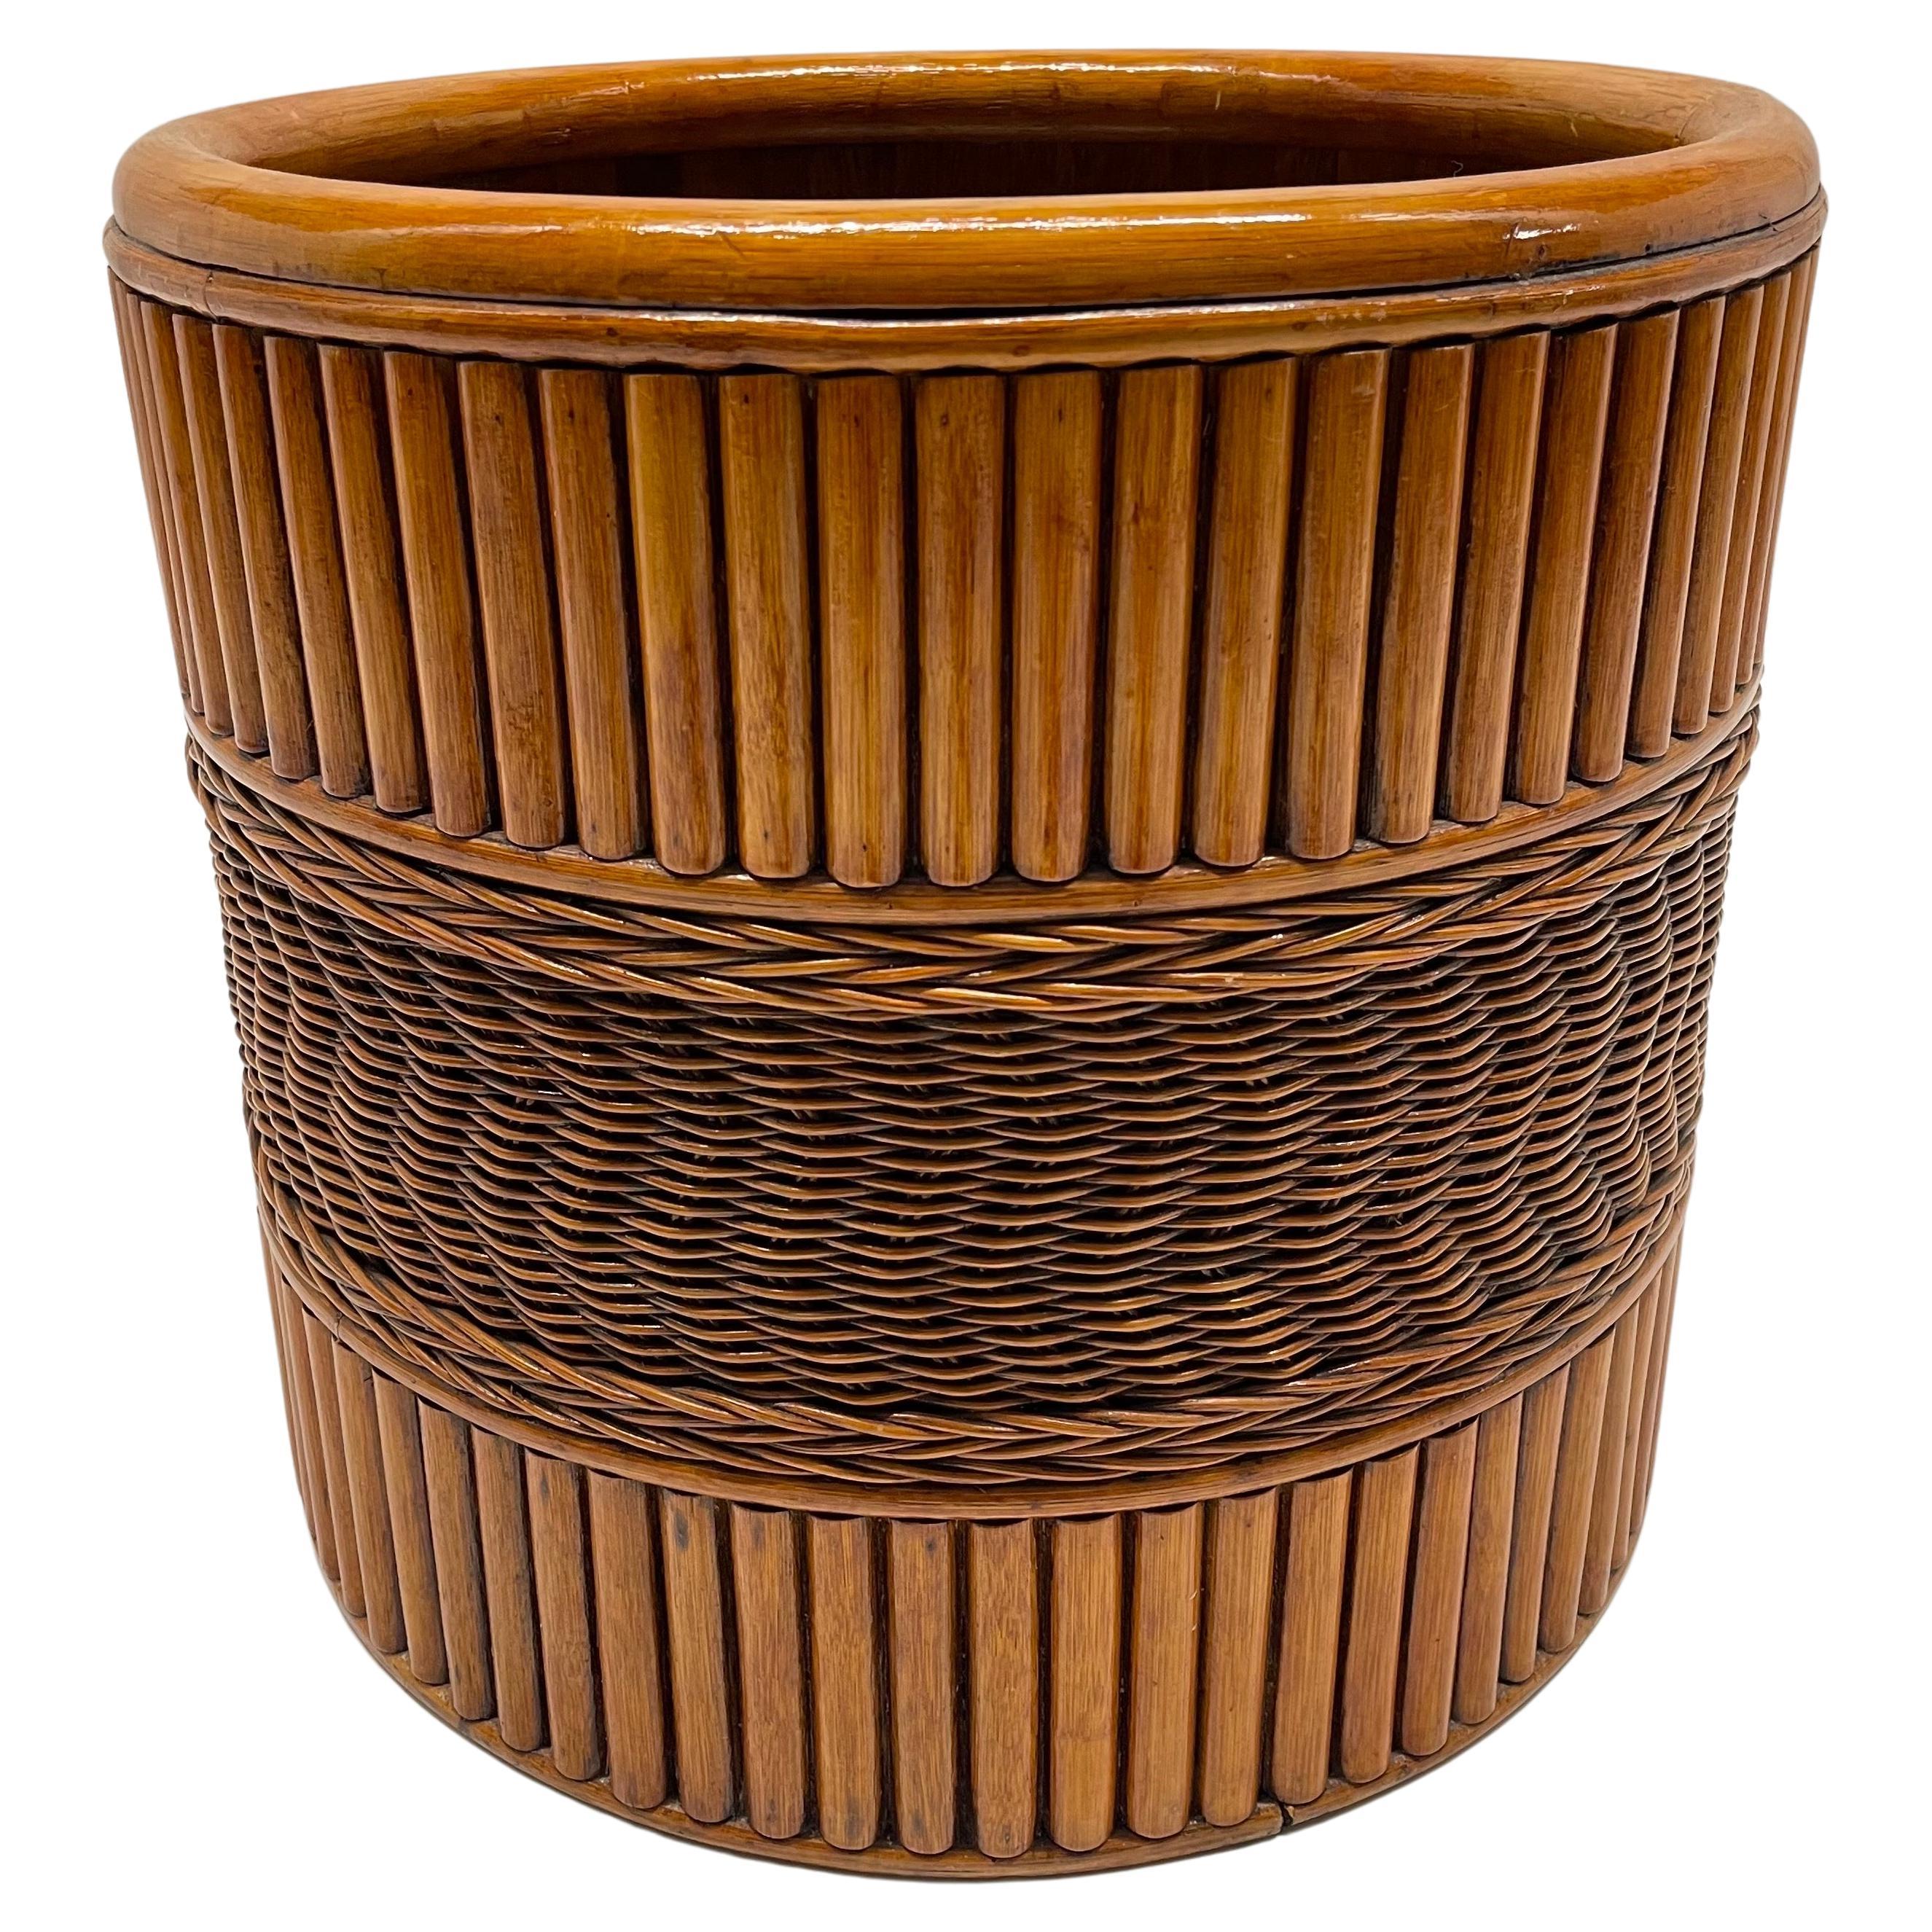 Midcentury Wicker and Rattan Planter or Garden Pot, USA, 1970s